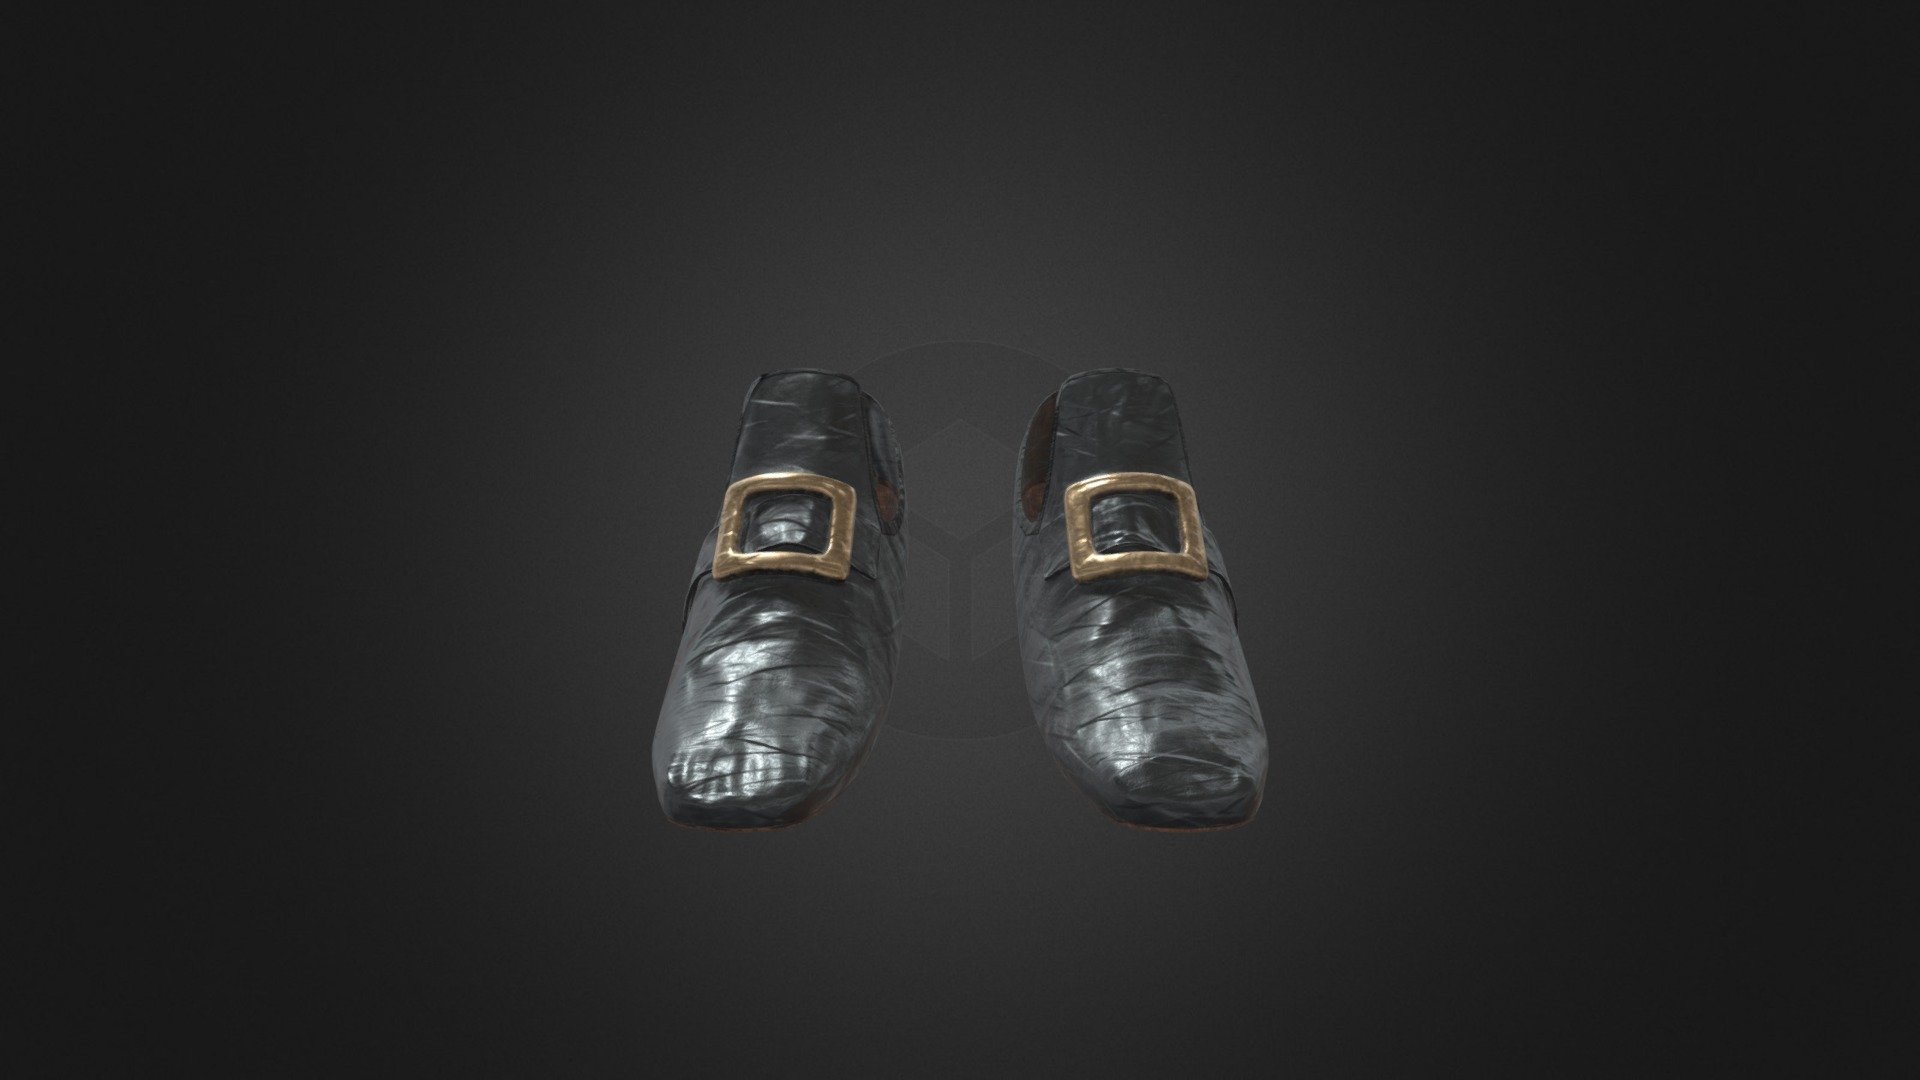 A pair of late 18th century / early 19th century mens buckle shoes. These shoes would be worn as typical daywear for men in the 18th century but in the early 19th century they were worn only by older men or at court as formal wear. These shoes are made of leather with a wooden sole and have been worn down over several years of use 3d model